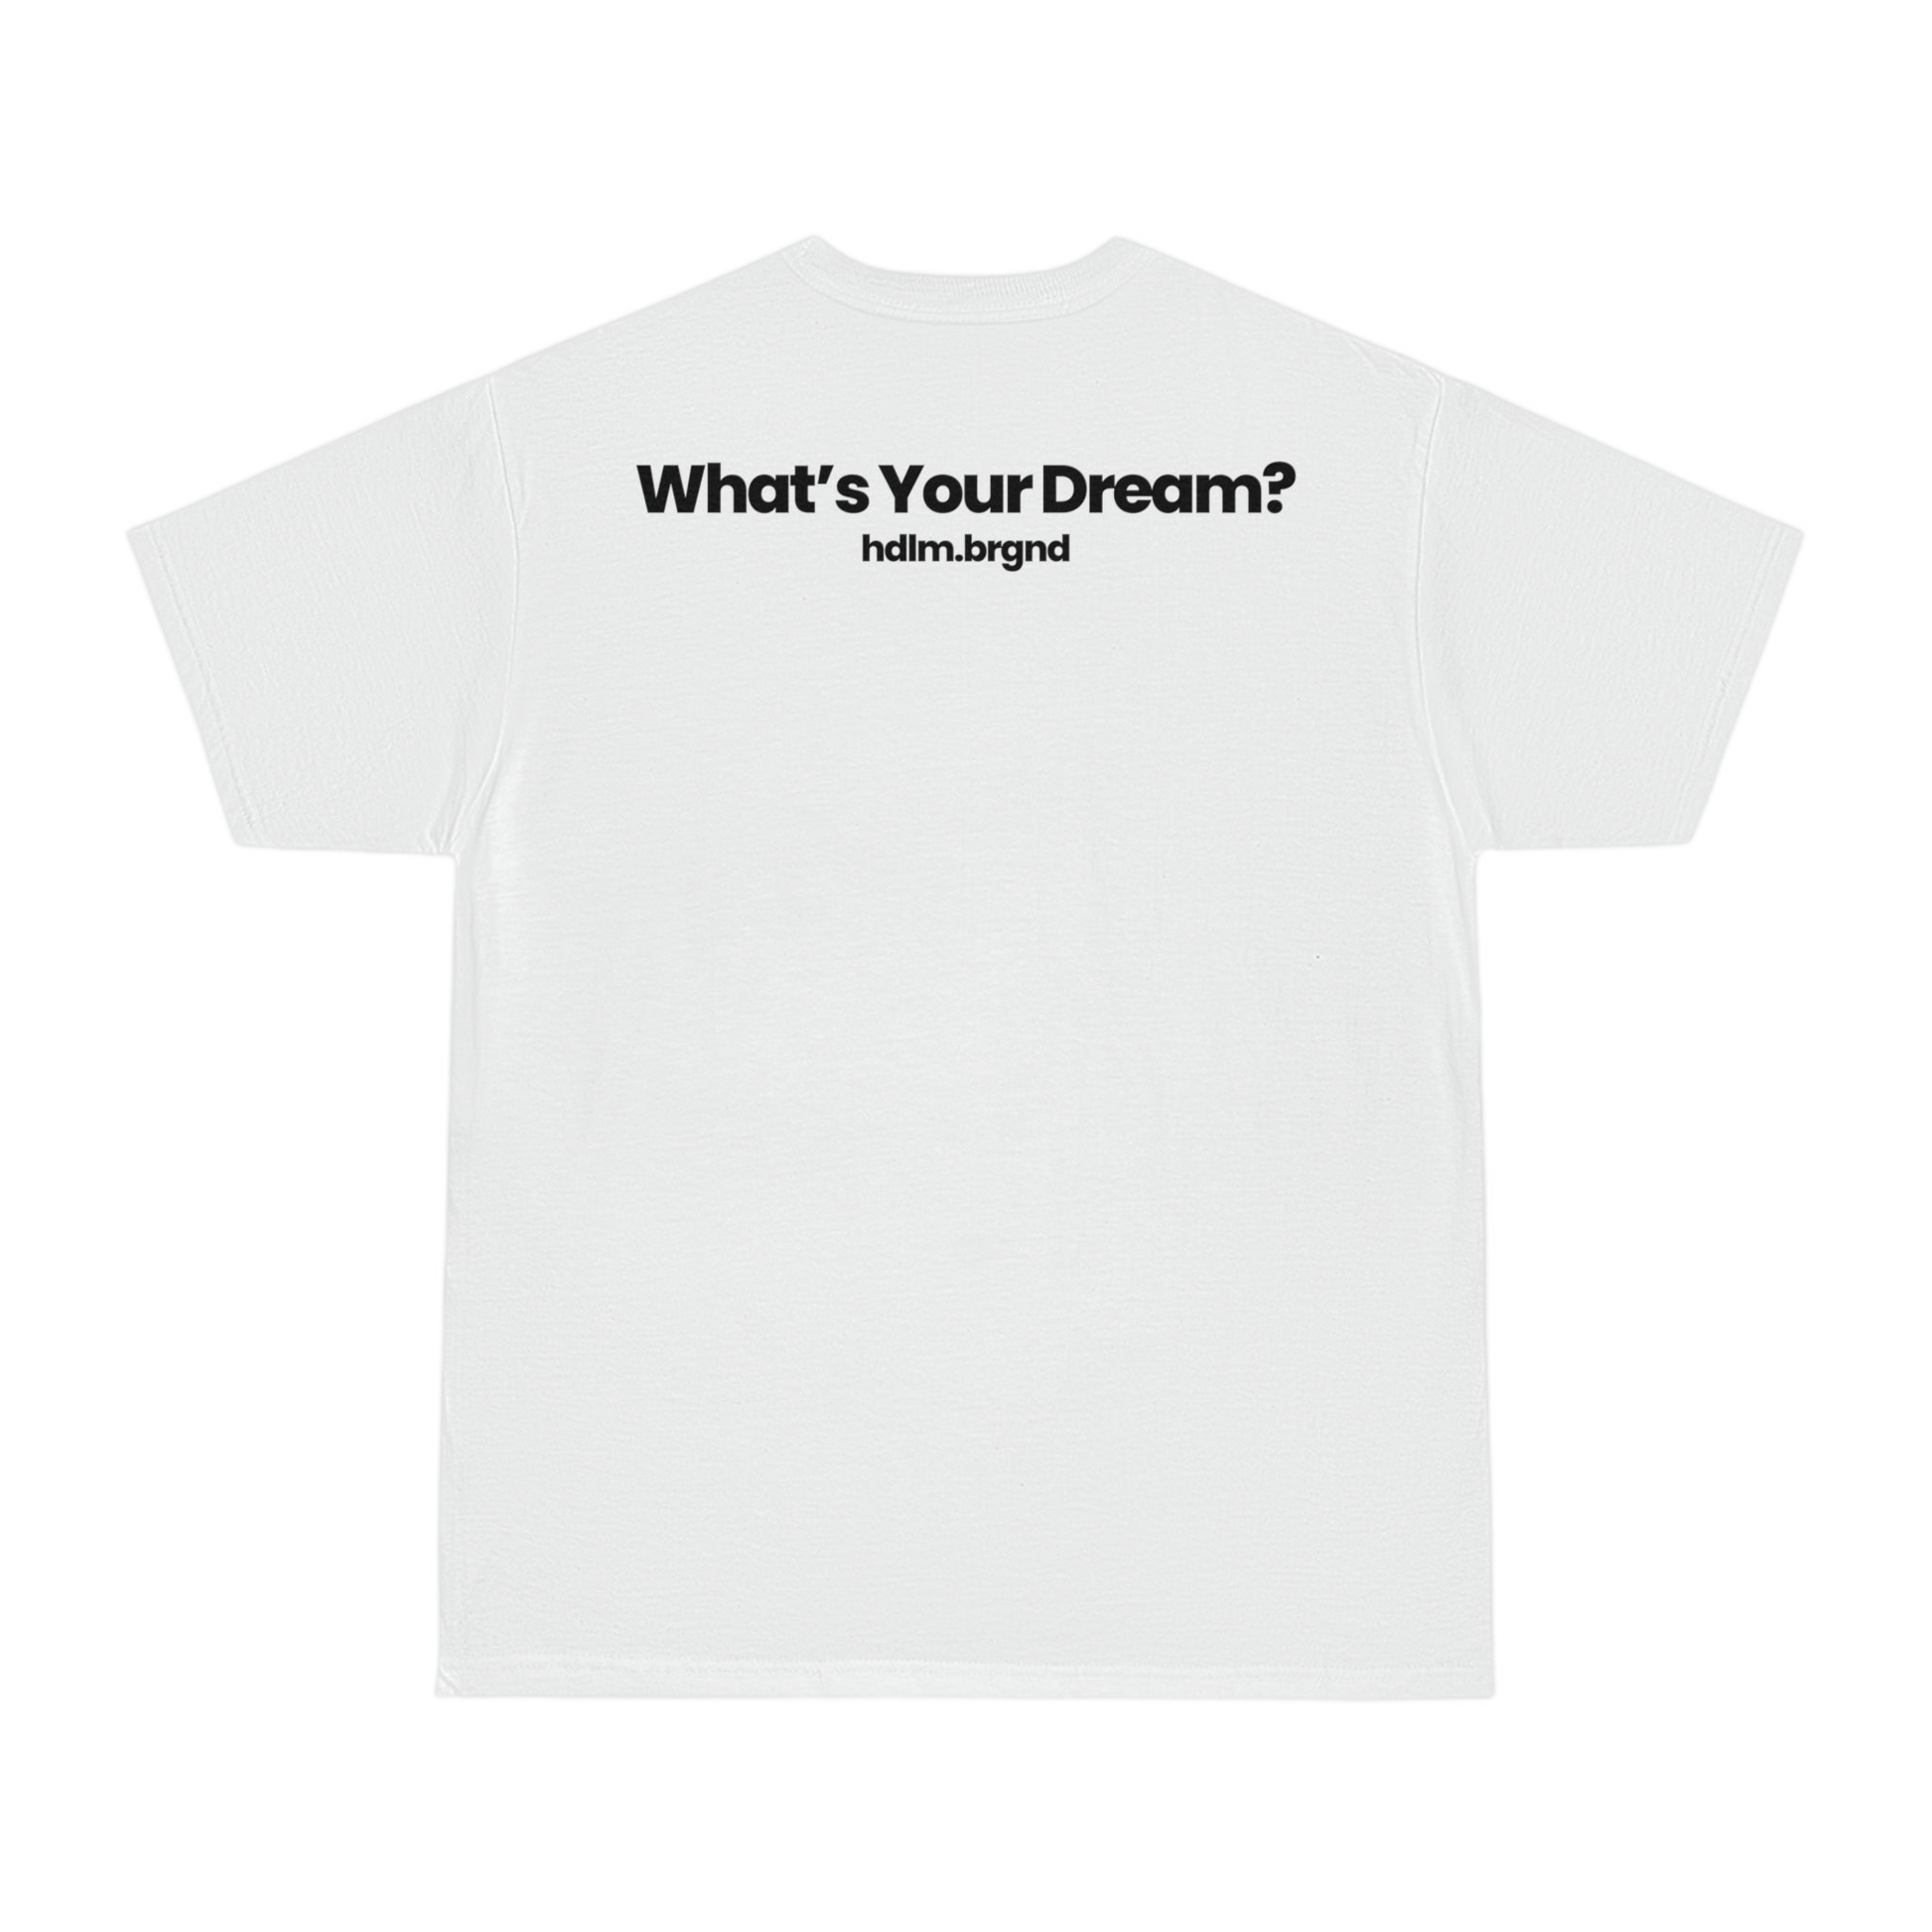 What's Your Dream? - T-shirt - hdlm.brgnd